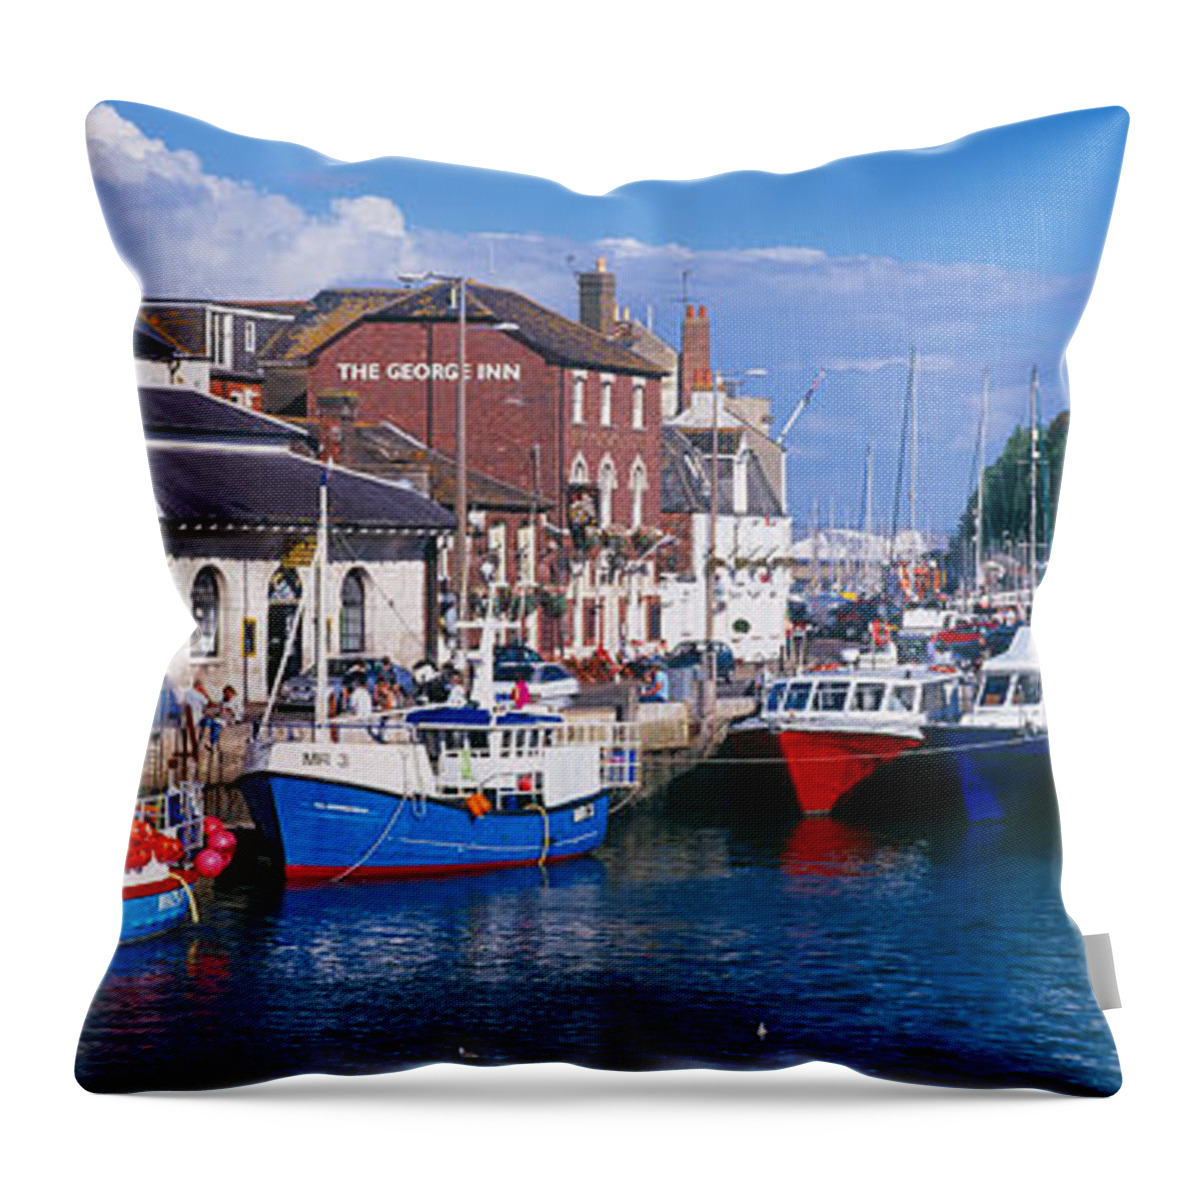 Photography Throw Pillow featuring the photograph Fishing Boats At A Harbor, Weymouth by Panoramic Images